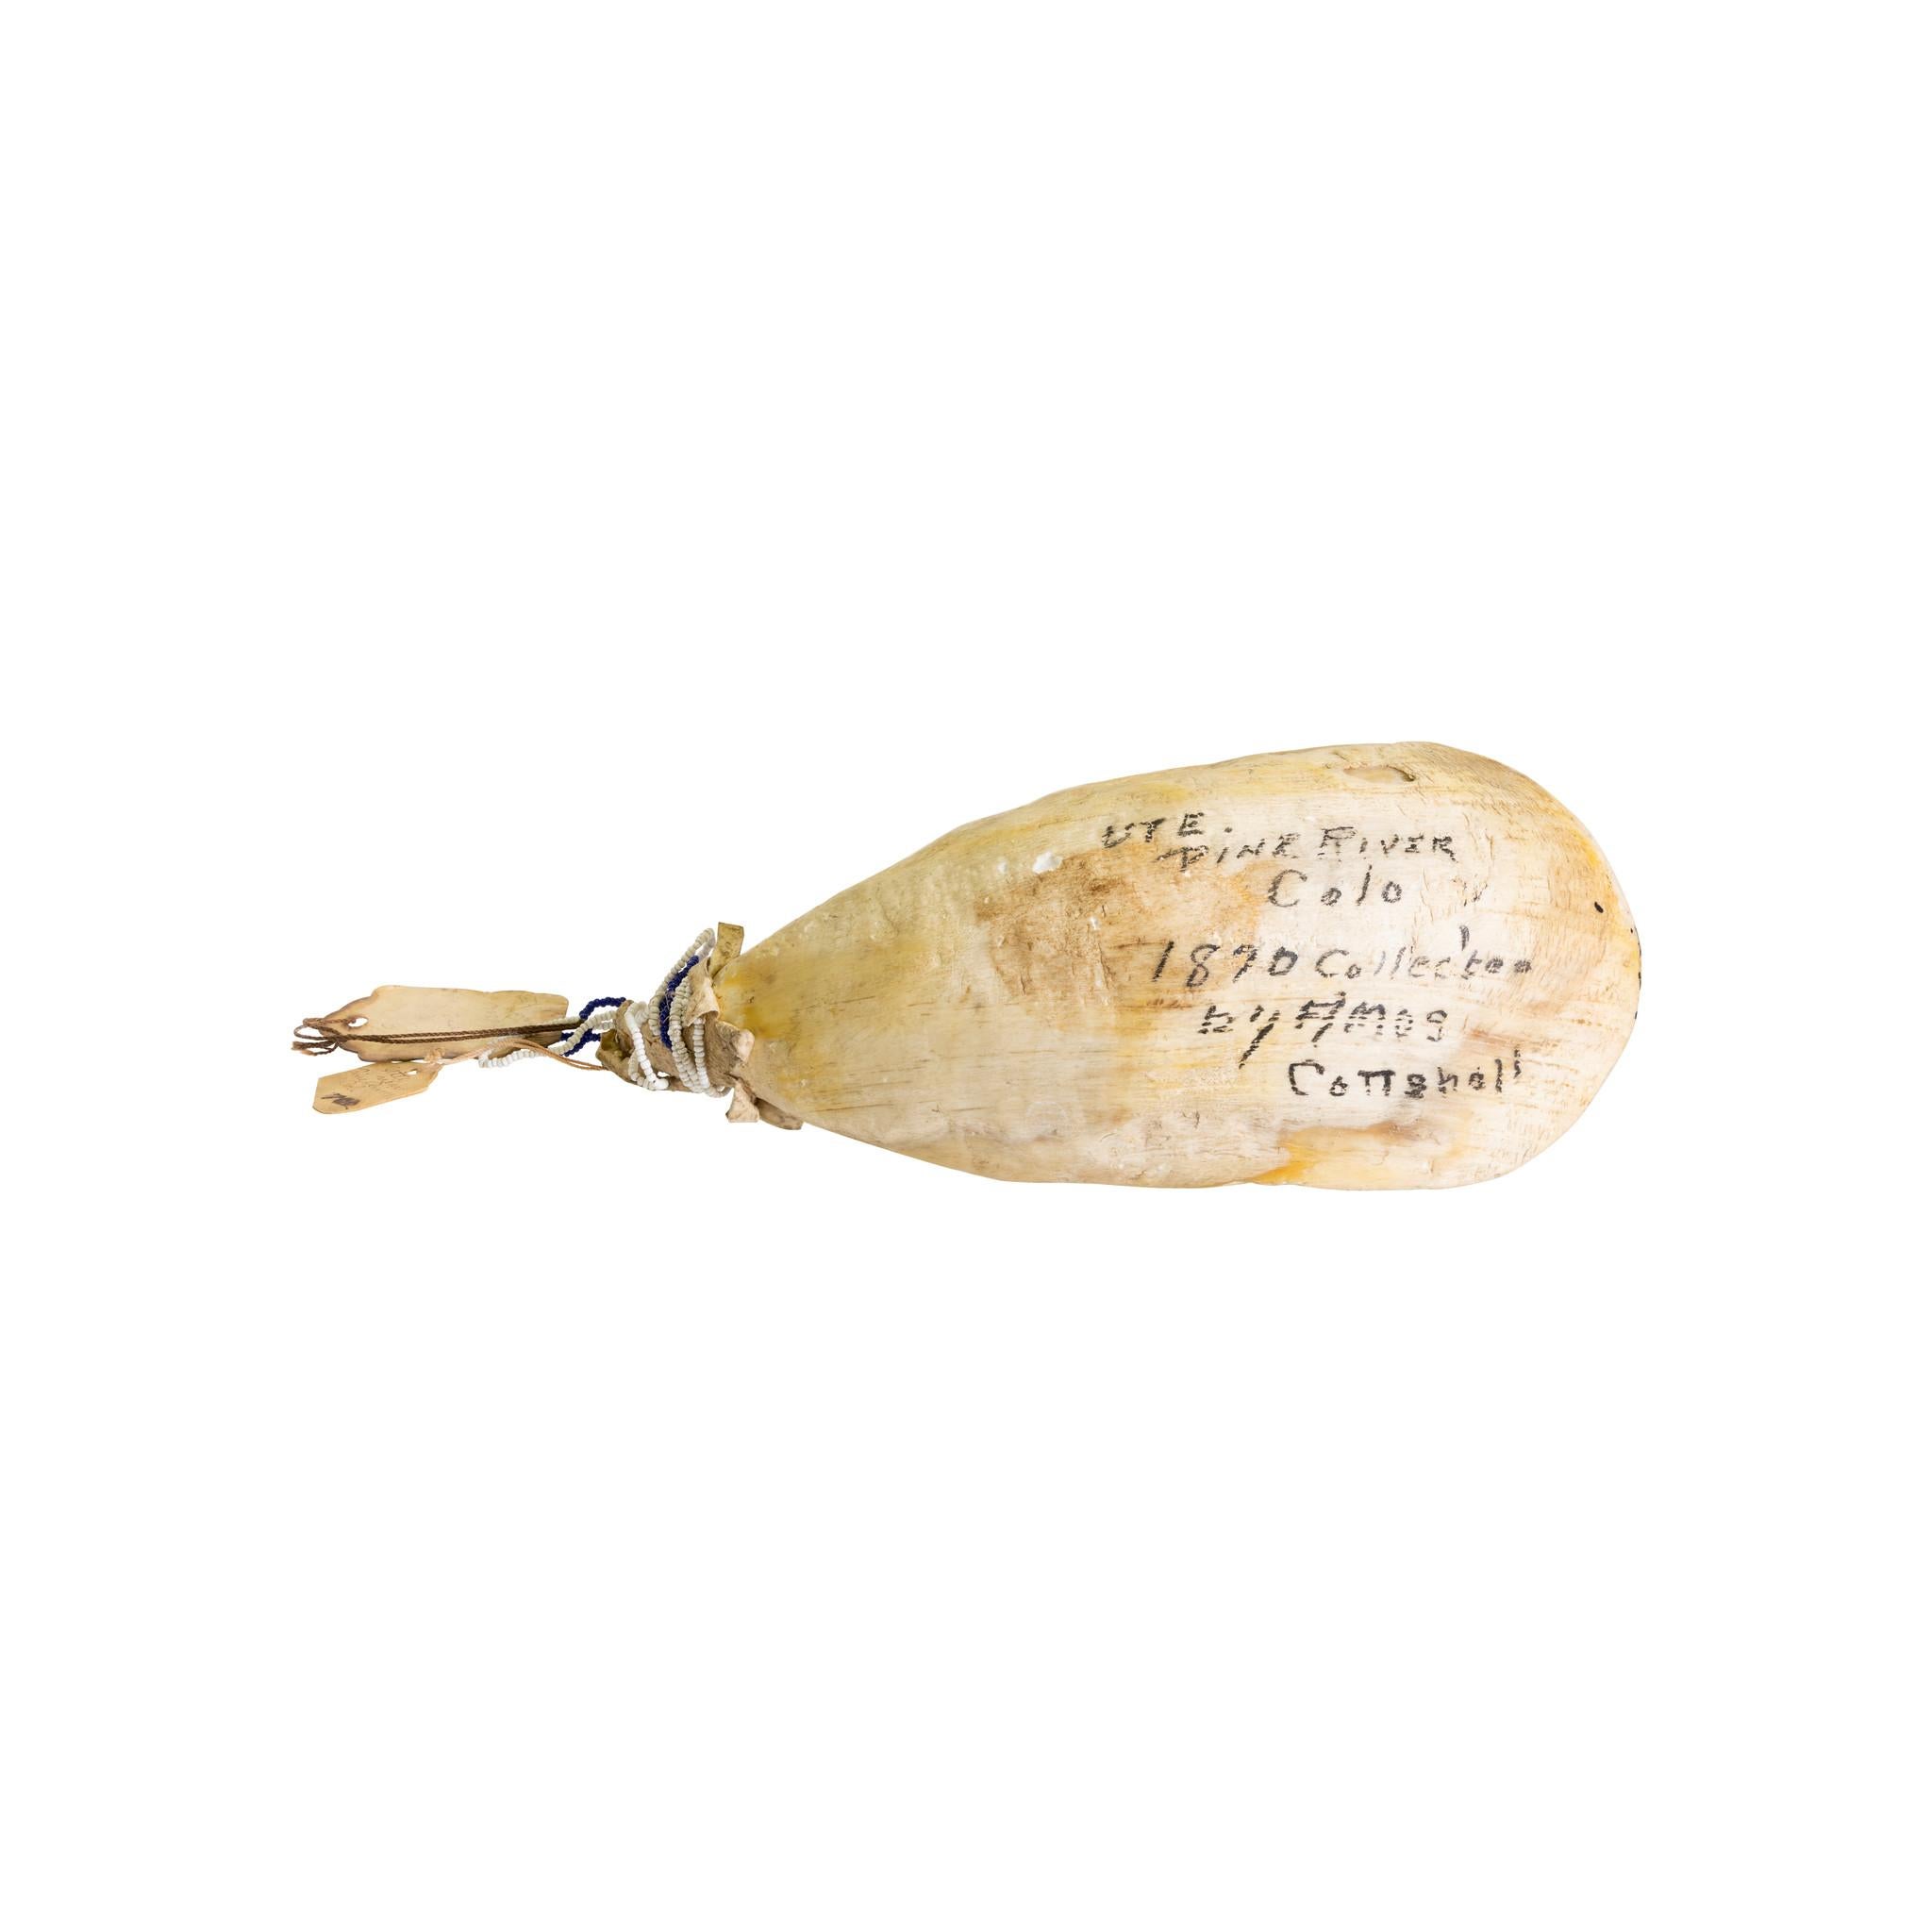 Ute sheep horn spoon with old tag “Ute, Pine River, Battle, Ex. Cottchall Collection. Collected 1870.” Brain tanned with blue and white beading on top.

Period: circa 1870
Origin: Ute
Size: 9